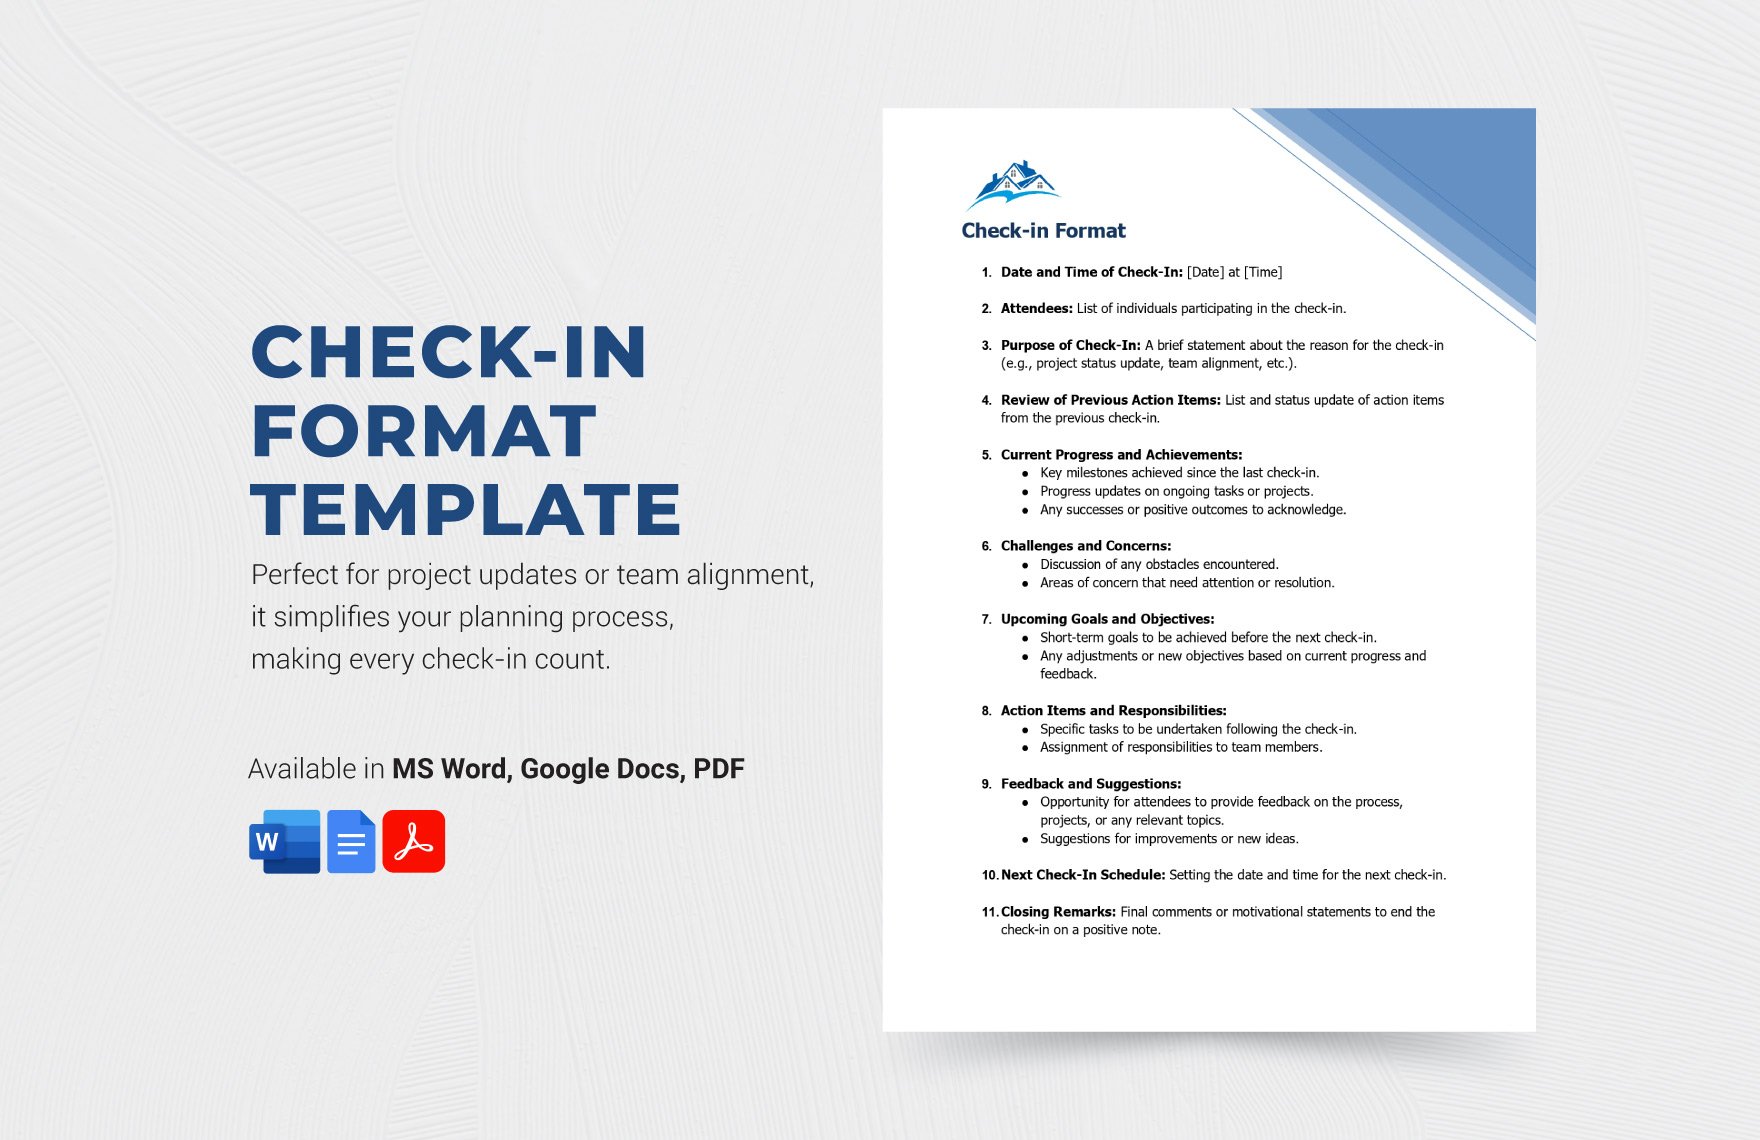 Check-in Format Template